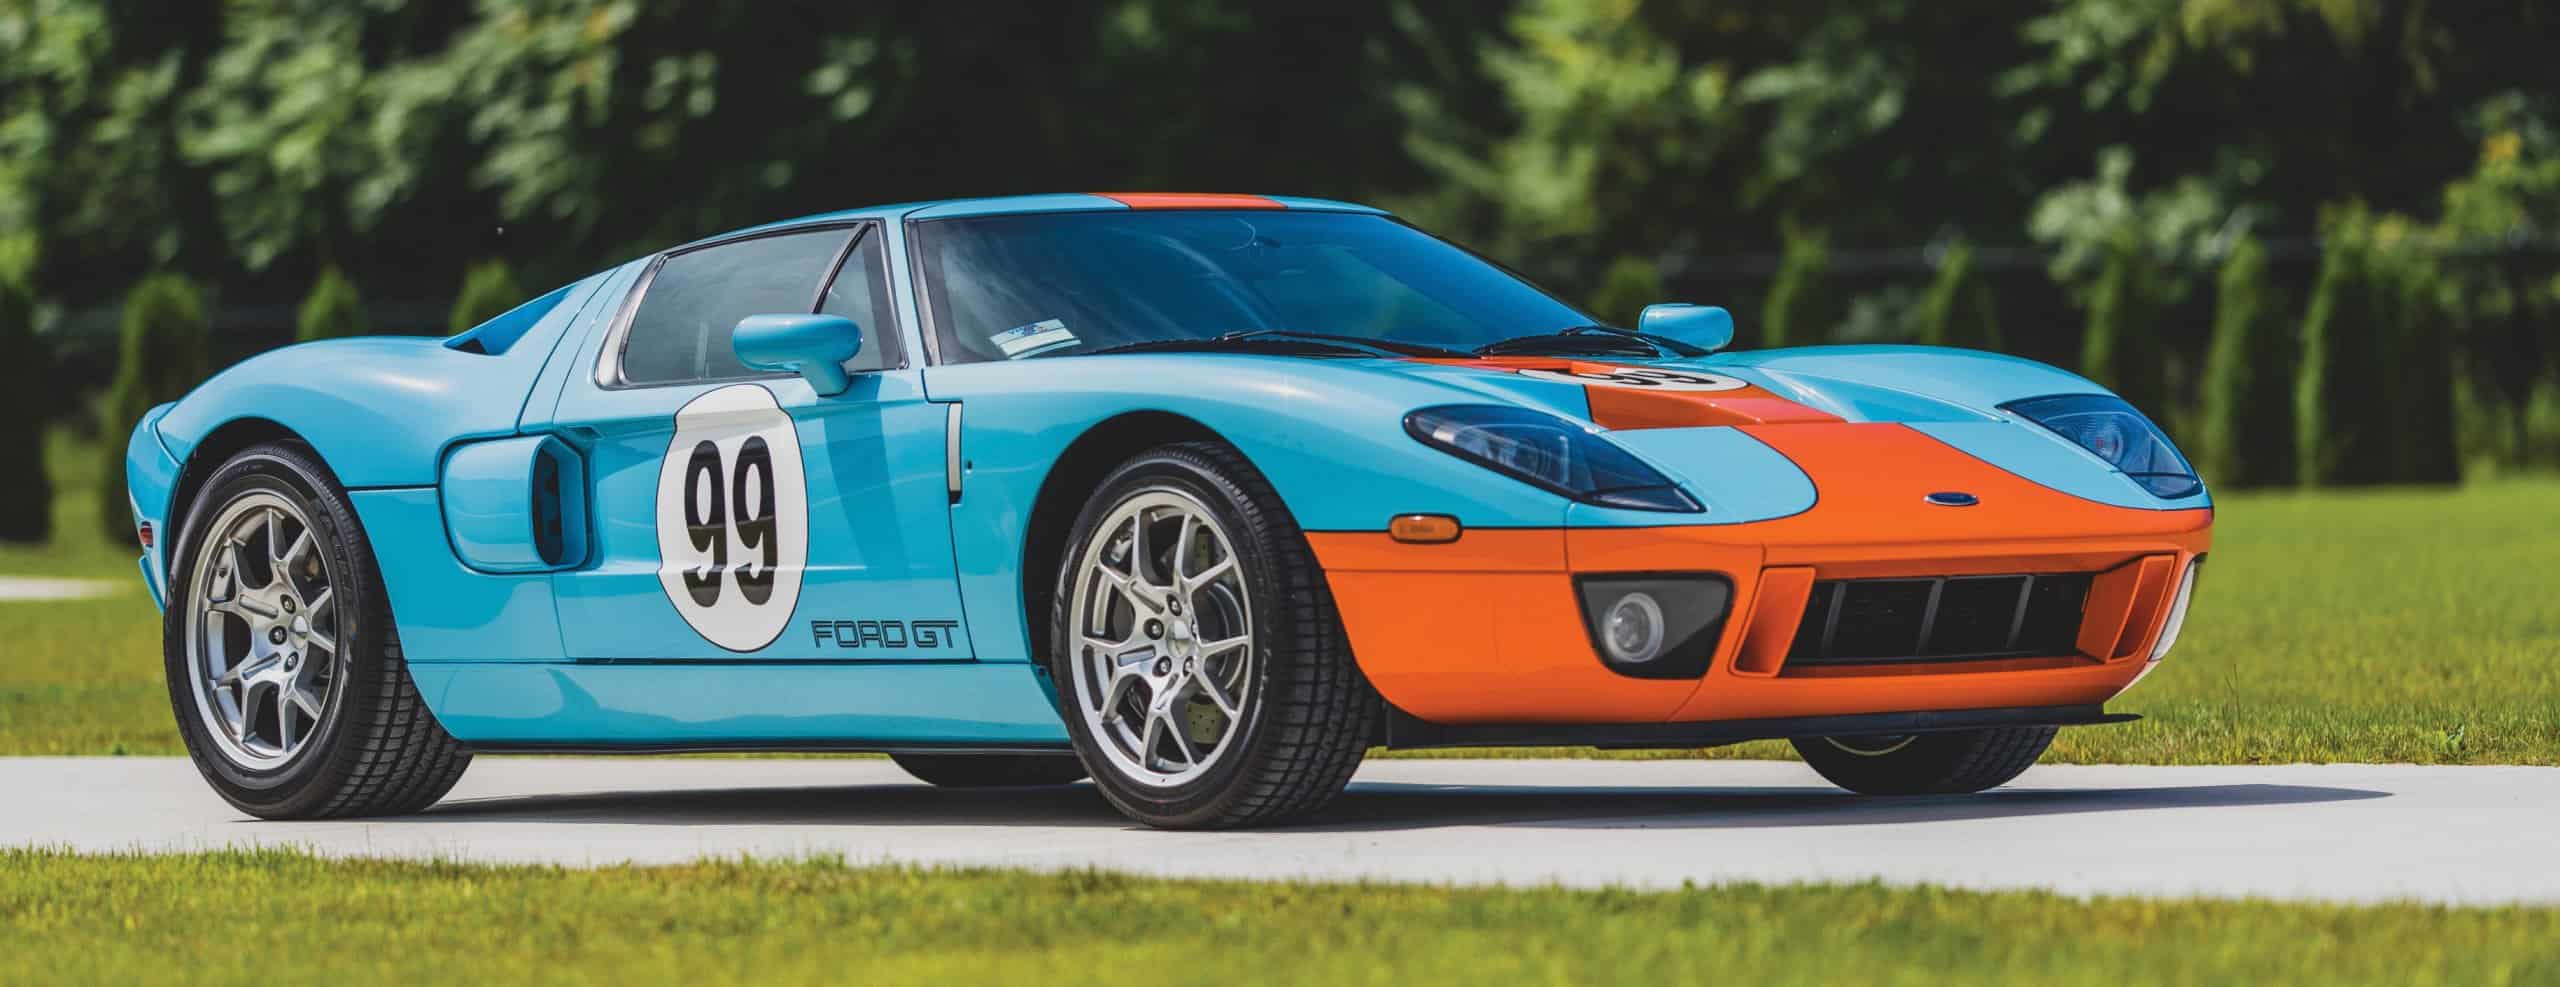 RM Sotheby, RM Sotheby’s will offer single-owner collection of 230 cars, ClassicCars.com Journal